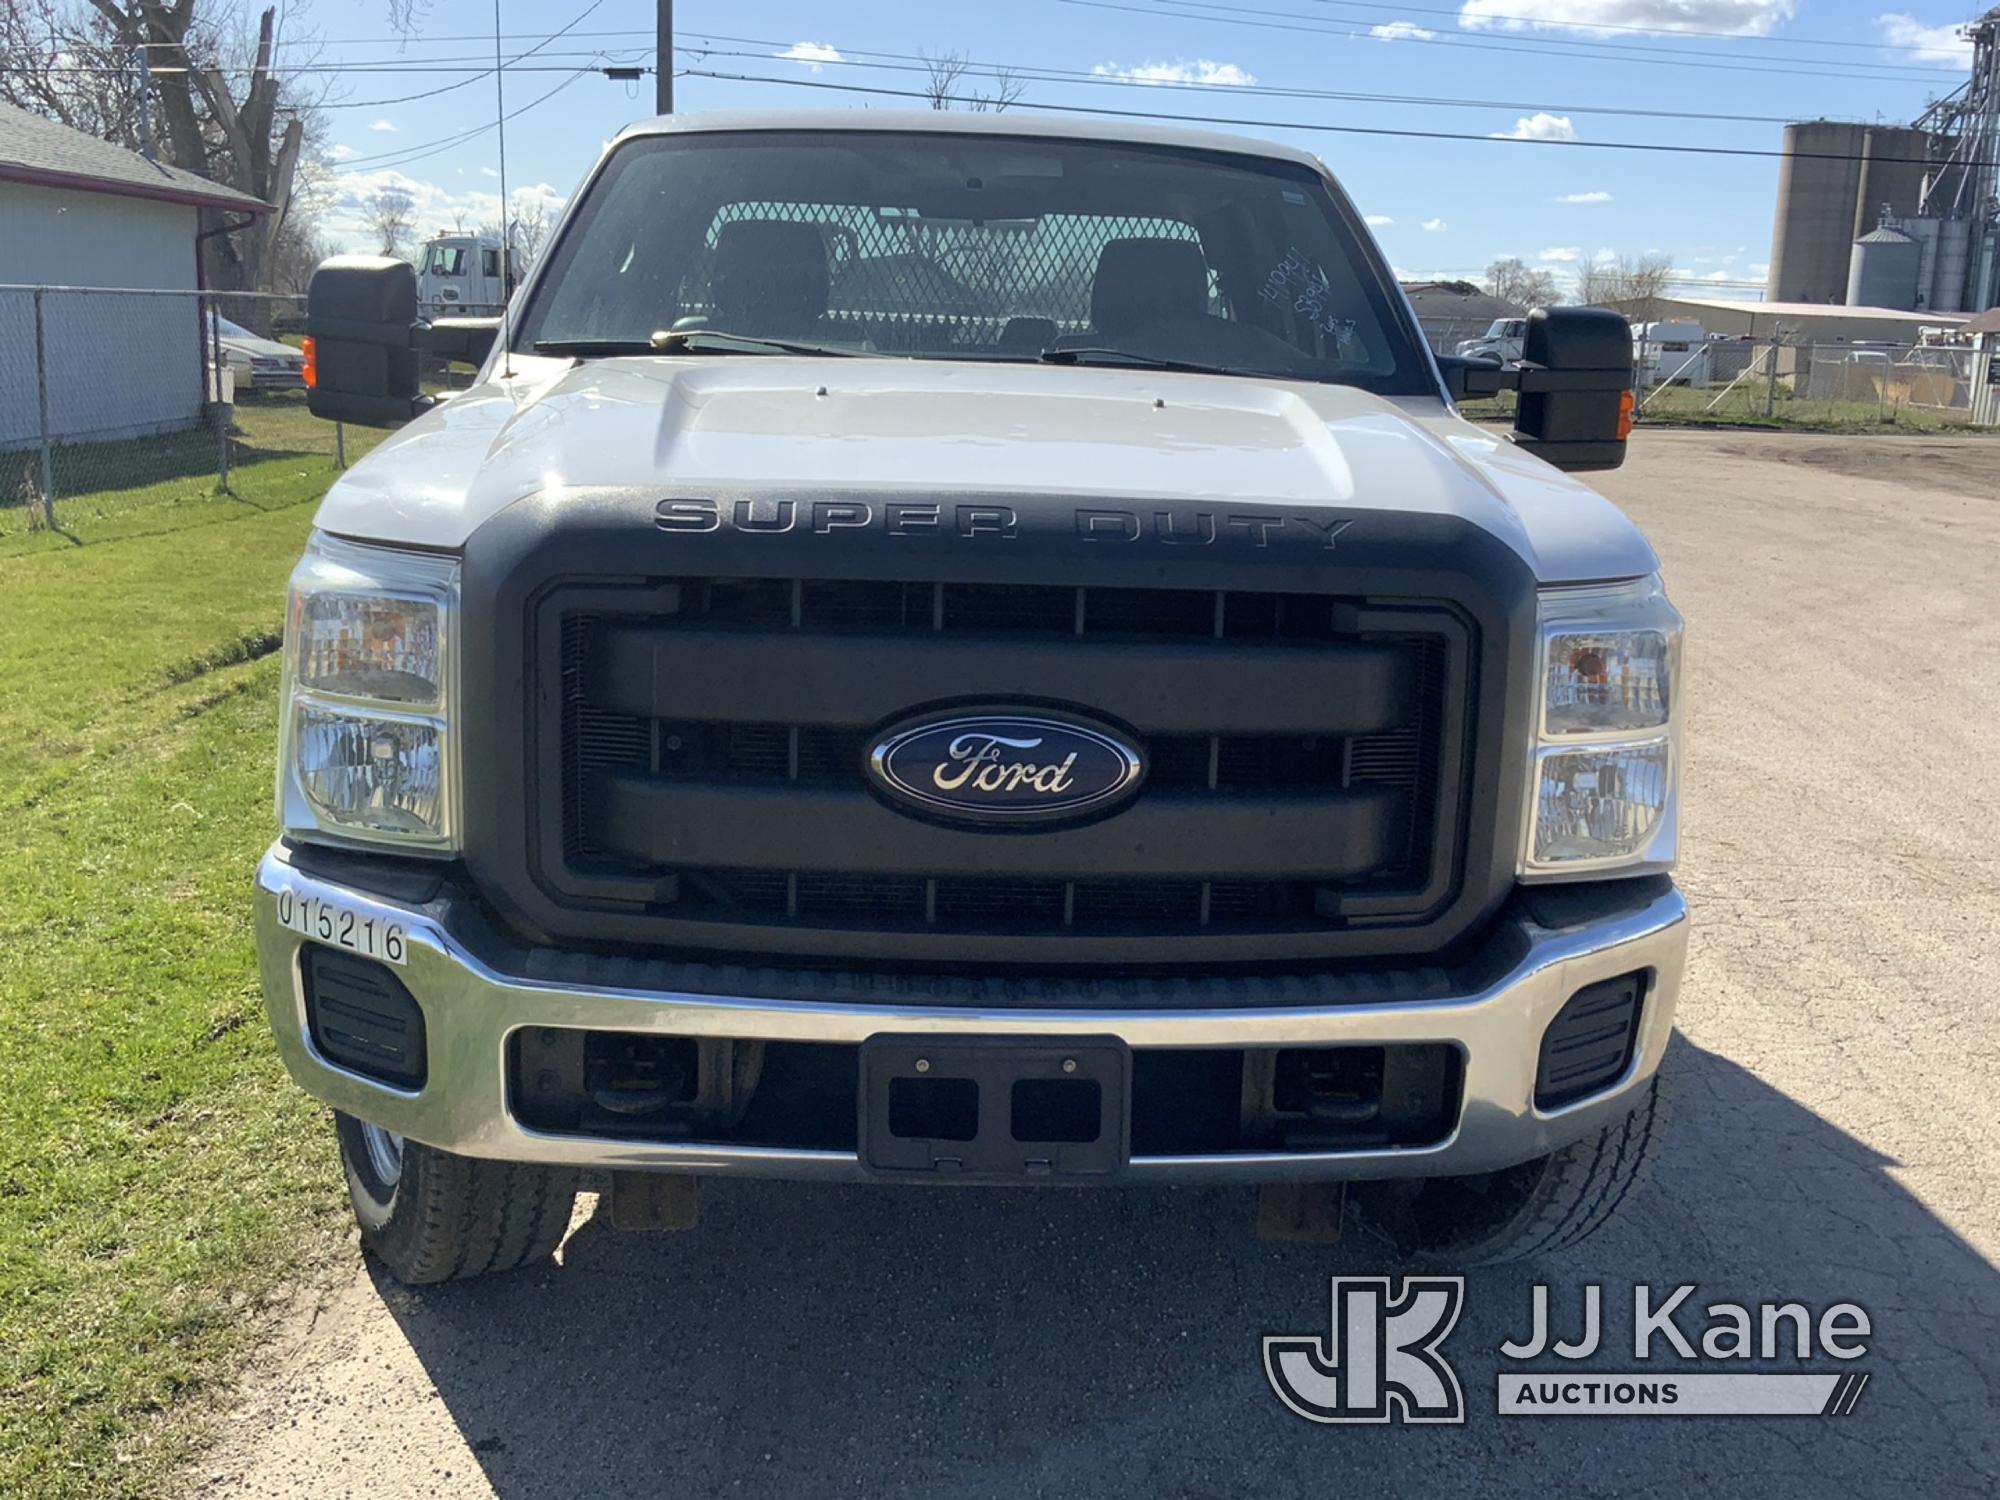 (South Beloit, IL) 2015 Ford F250 4x4 Extended-Cab Pickup Truck Runs, Moves, Check Engine Light On